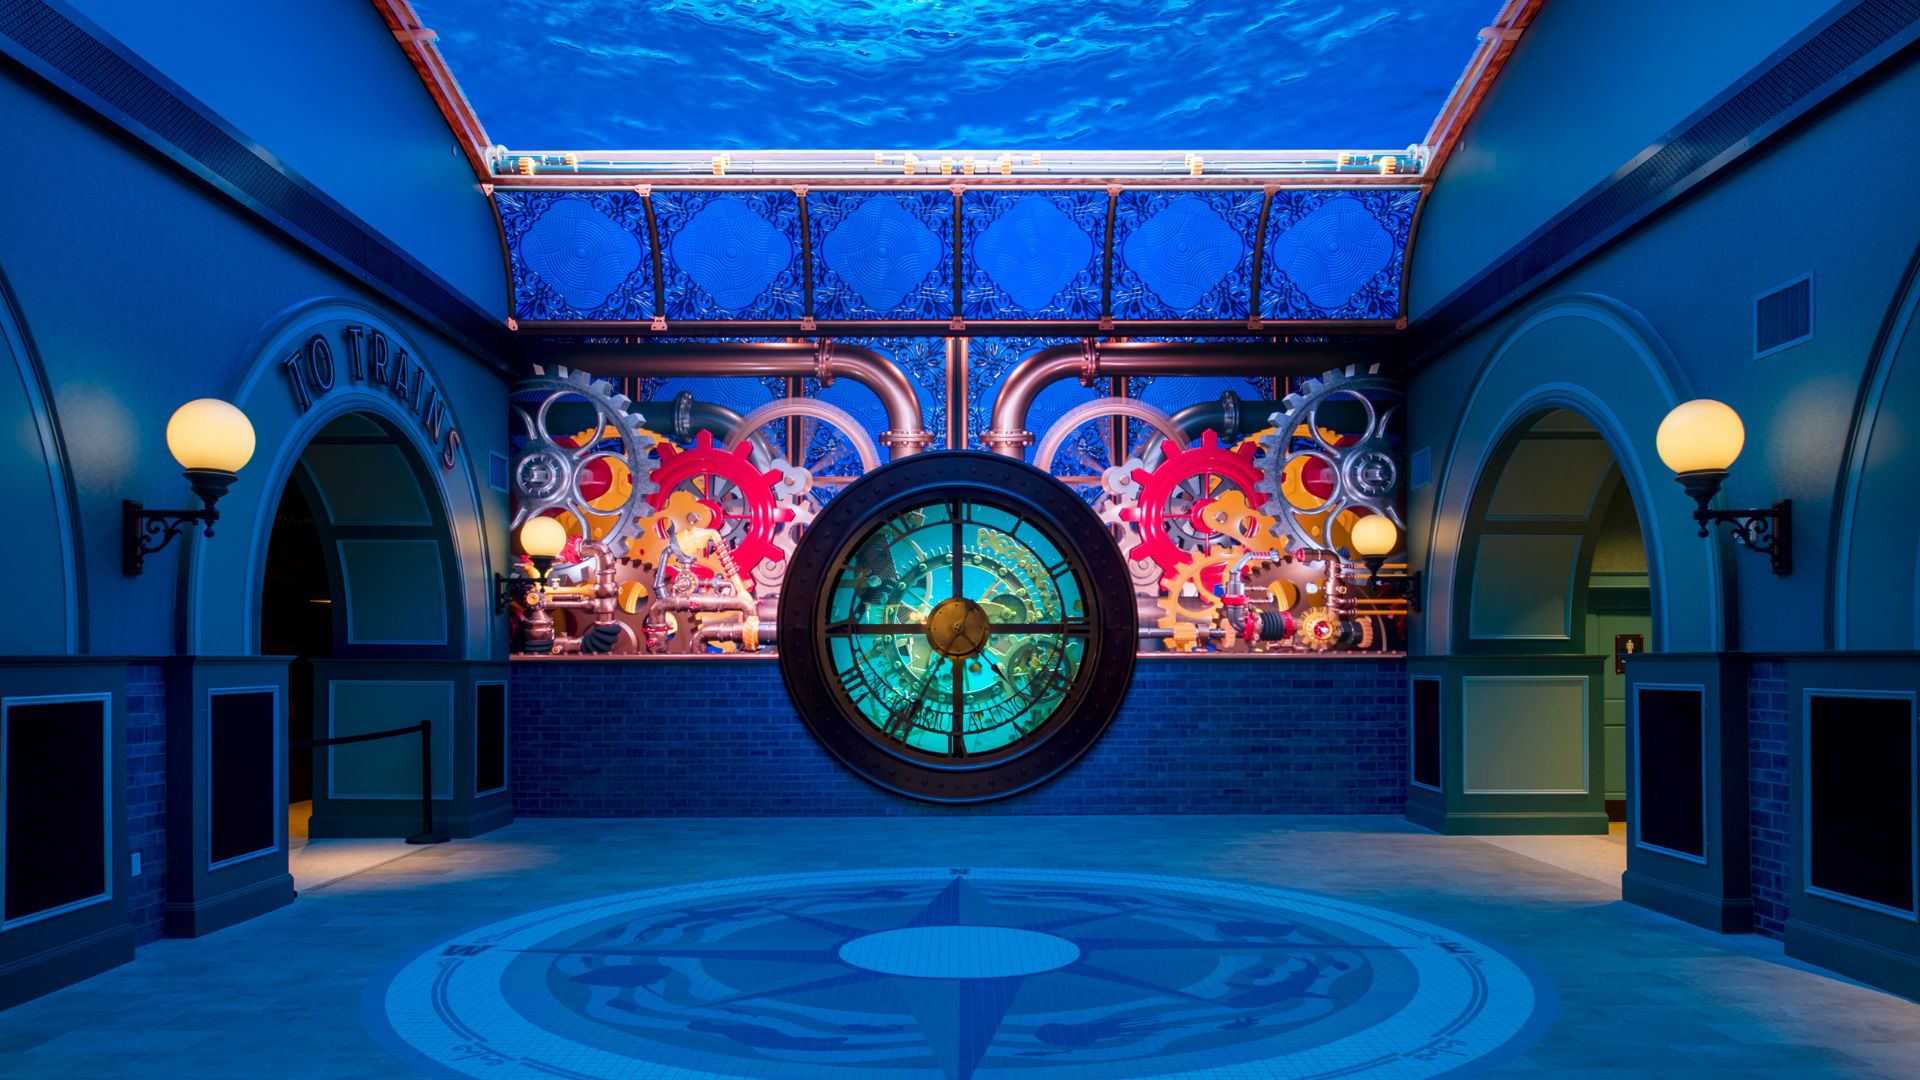 The St. Louis Aquarium is retrofitted in a 19th-century train station.